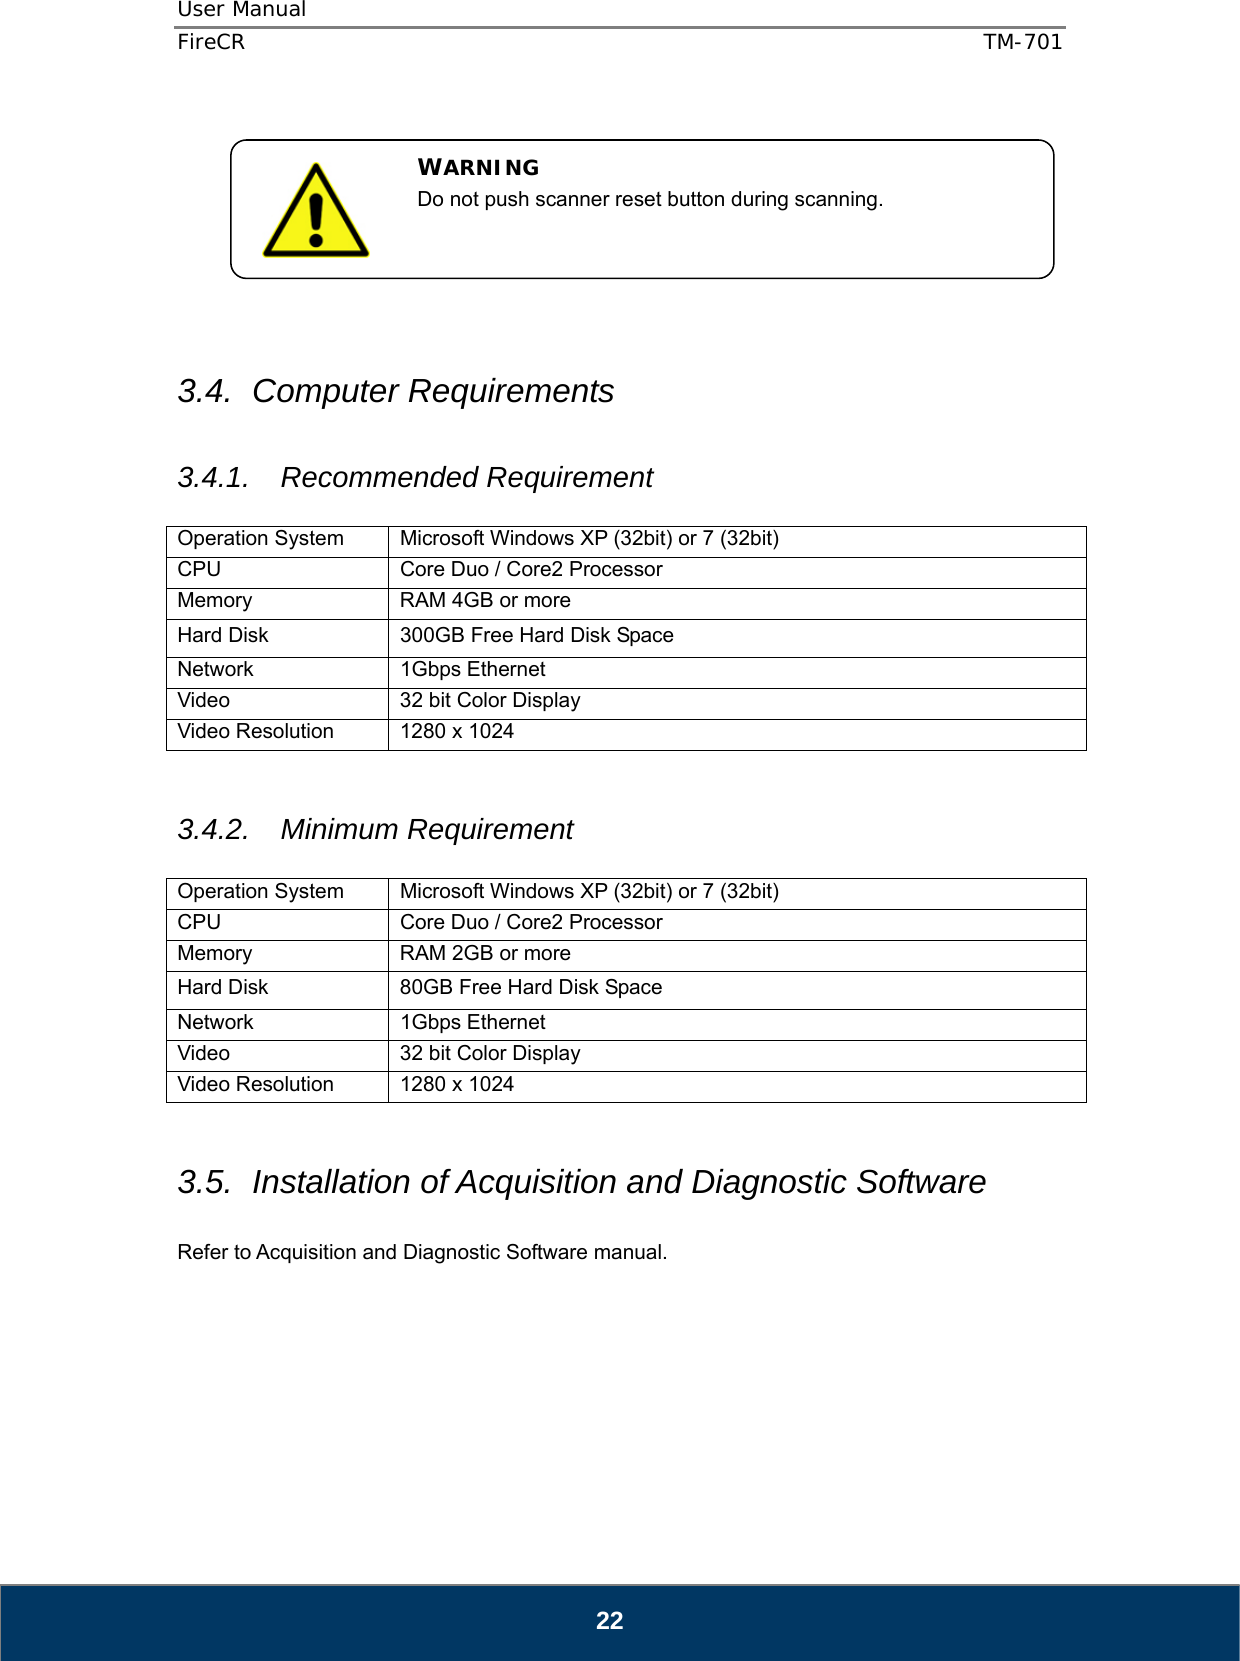 User Manual  FireCR  TM-701   22         3.4. Computer Requirements  3.4.1. Recommended Requirement  Operation System  Microsoft Windows XP (32bit) or 7 (32bit) CPU  Core Duo / Core2 Processor Memory  RAM 4GB or more Hard Disk  300GB Free Hard Disk Space Network 1Gbps Ethernet Video  32 bit Color Display Video Resolution  1280 x 1024   3.4.2. Minimum Requirement  Operation System  Microsoft Windows XP (32bit) or 7 (32bit) CPU  Core Duo / Core2 Processor Memory  RAM 2GB or more Hard Disk  80GB Free Hard Disk Space Network 1Gbps Ethernet Video  32 bit Color Display Video Resolution  1280 x 1024   3.5.  Installation of Acquisition and Diagnostic Software  Refer to Acquisition and Diagnostic Software manual.        WARNING Do not push scanner reset button during scanning. 